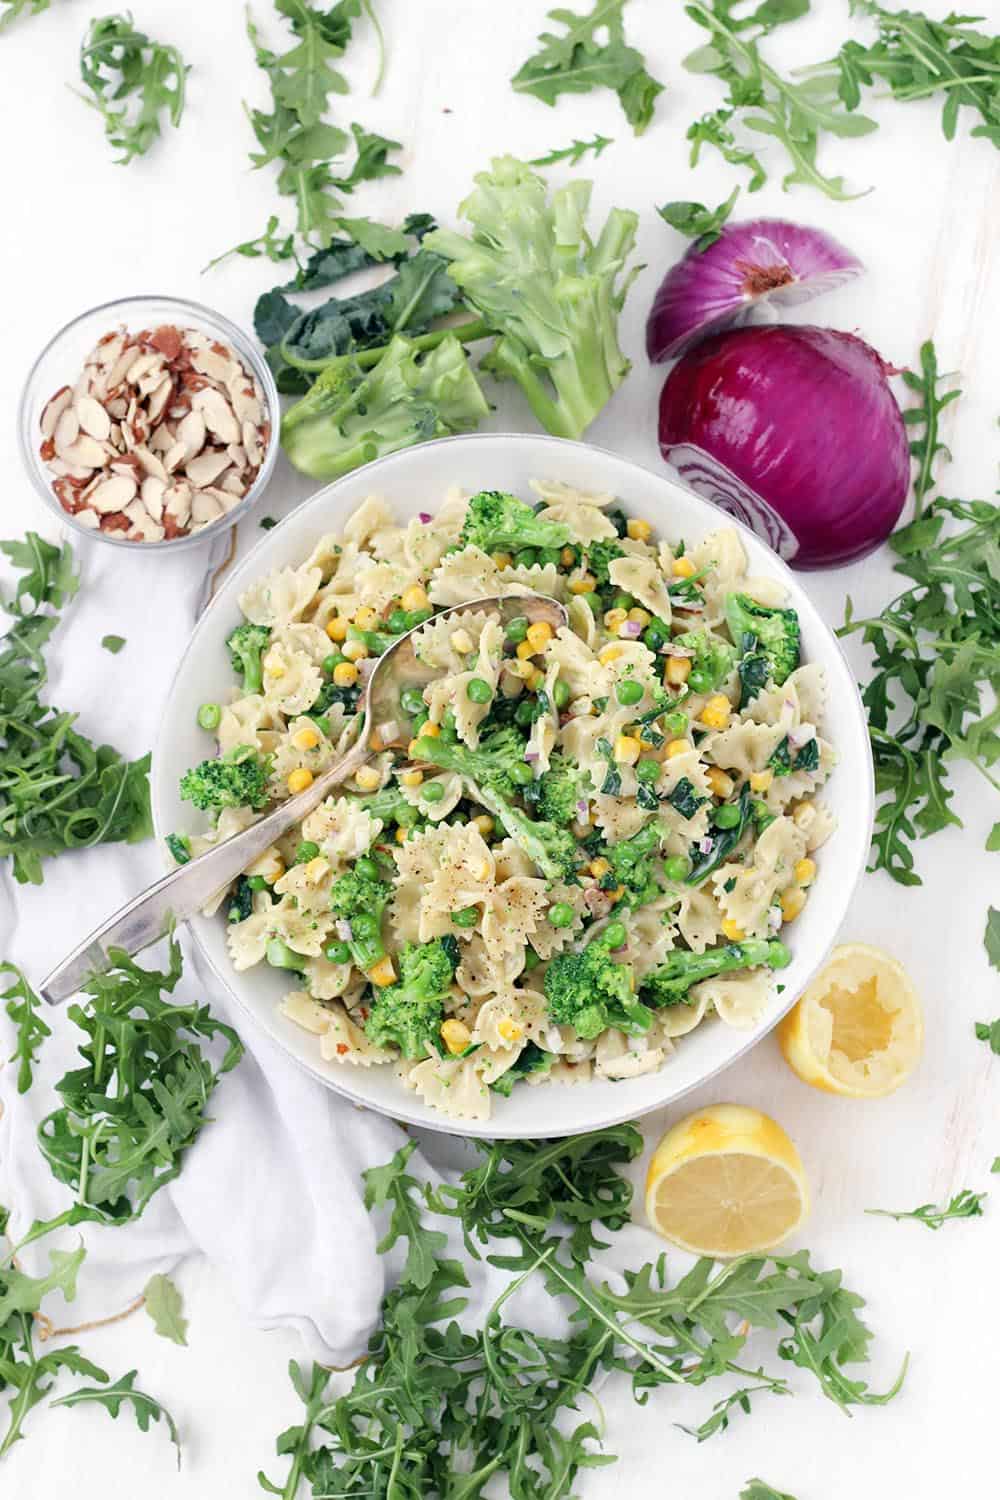 This creamy lemony vegetable pasta salad recipe is a cinch to make- the vegetables boil directly in the pasta water for less effort and clean up. Tossed in a light lemon garlic mayo and olive oil dressing, this is the perfect vegetarian make-ahead side or light meal.